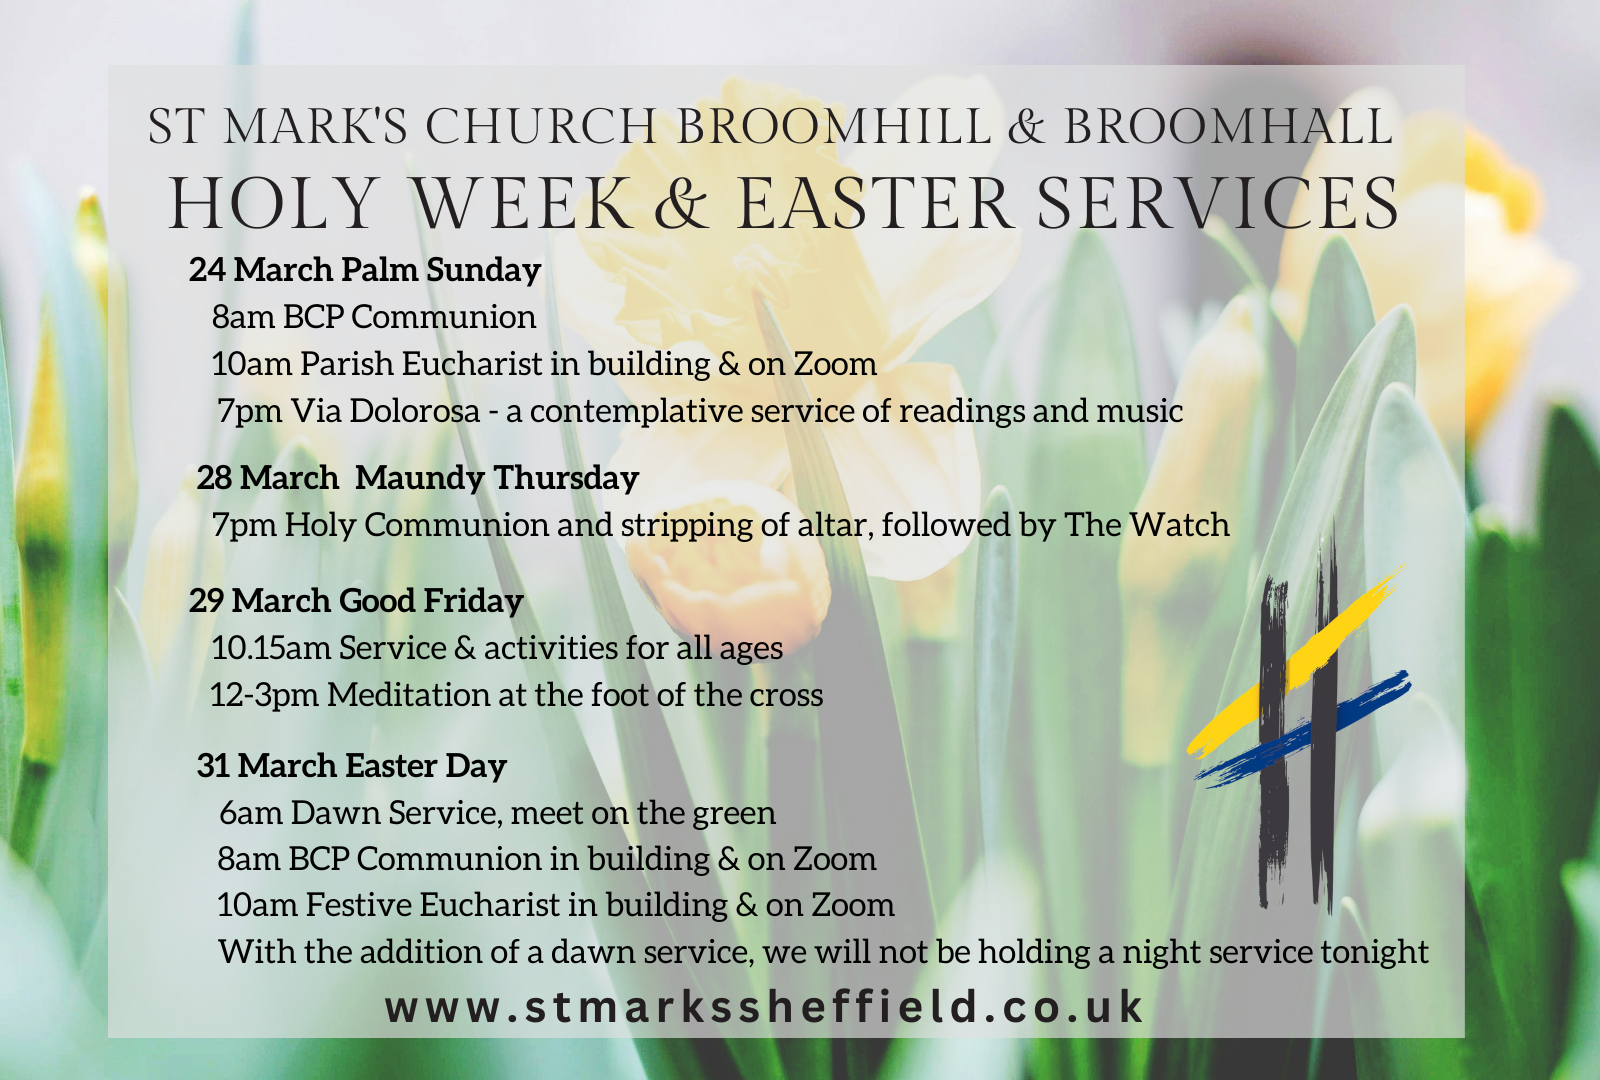 Good Friday Service & activities for all ages 